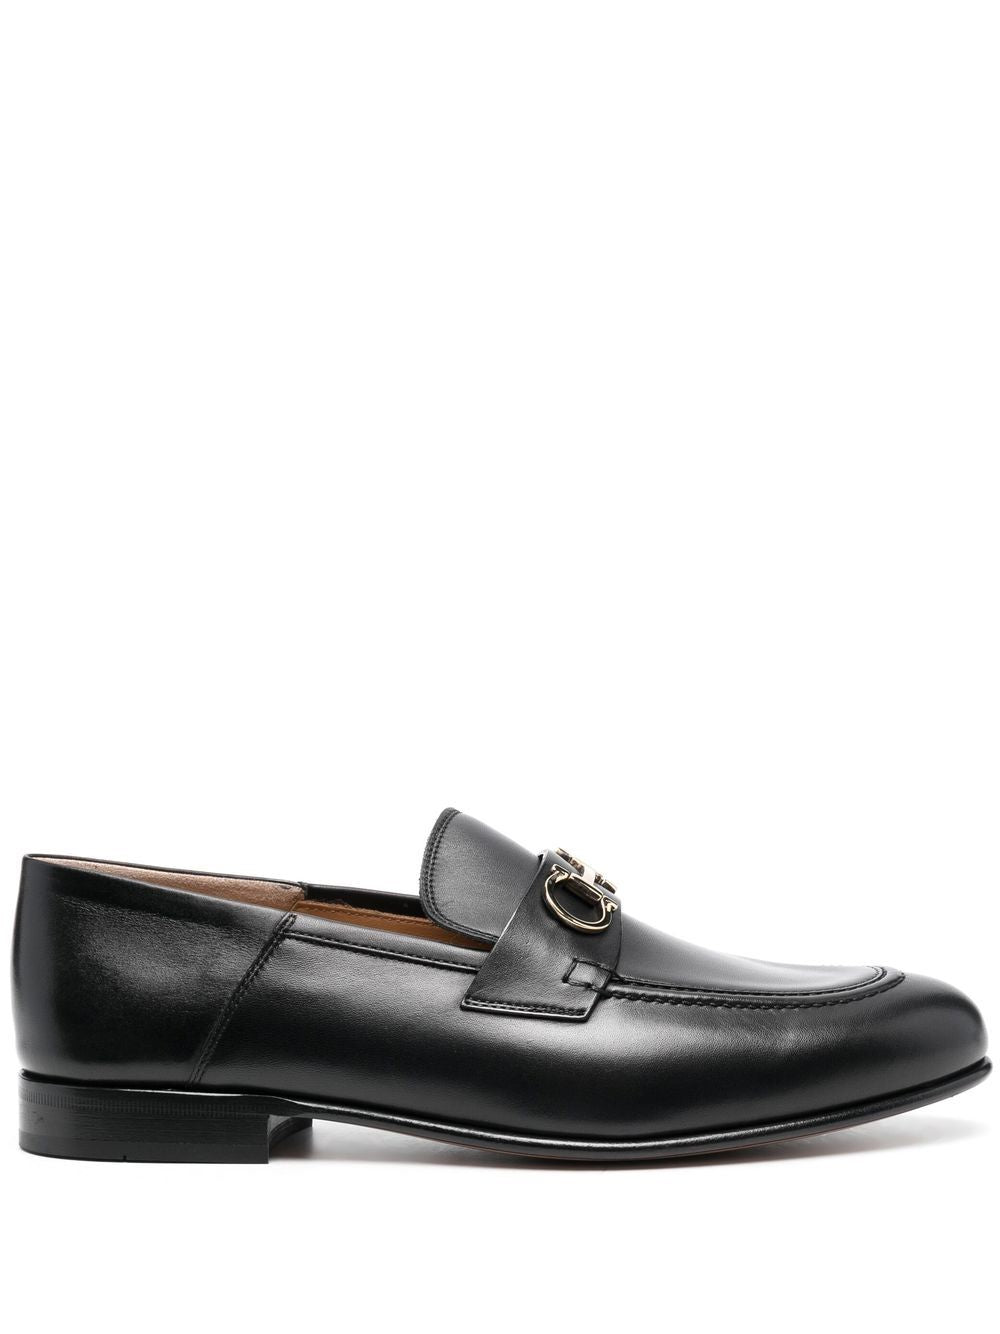 Shop Ferragamo Stylish Black Leather Loafers With Gancini Hook Buckle For Women